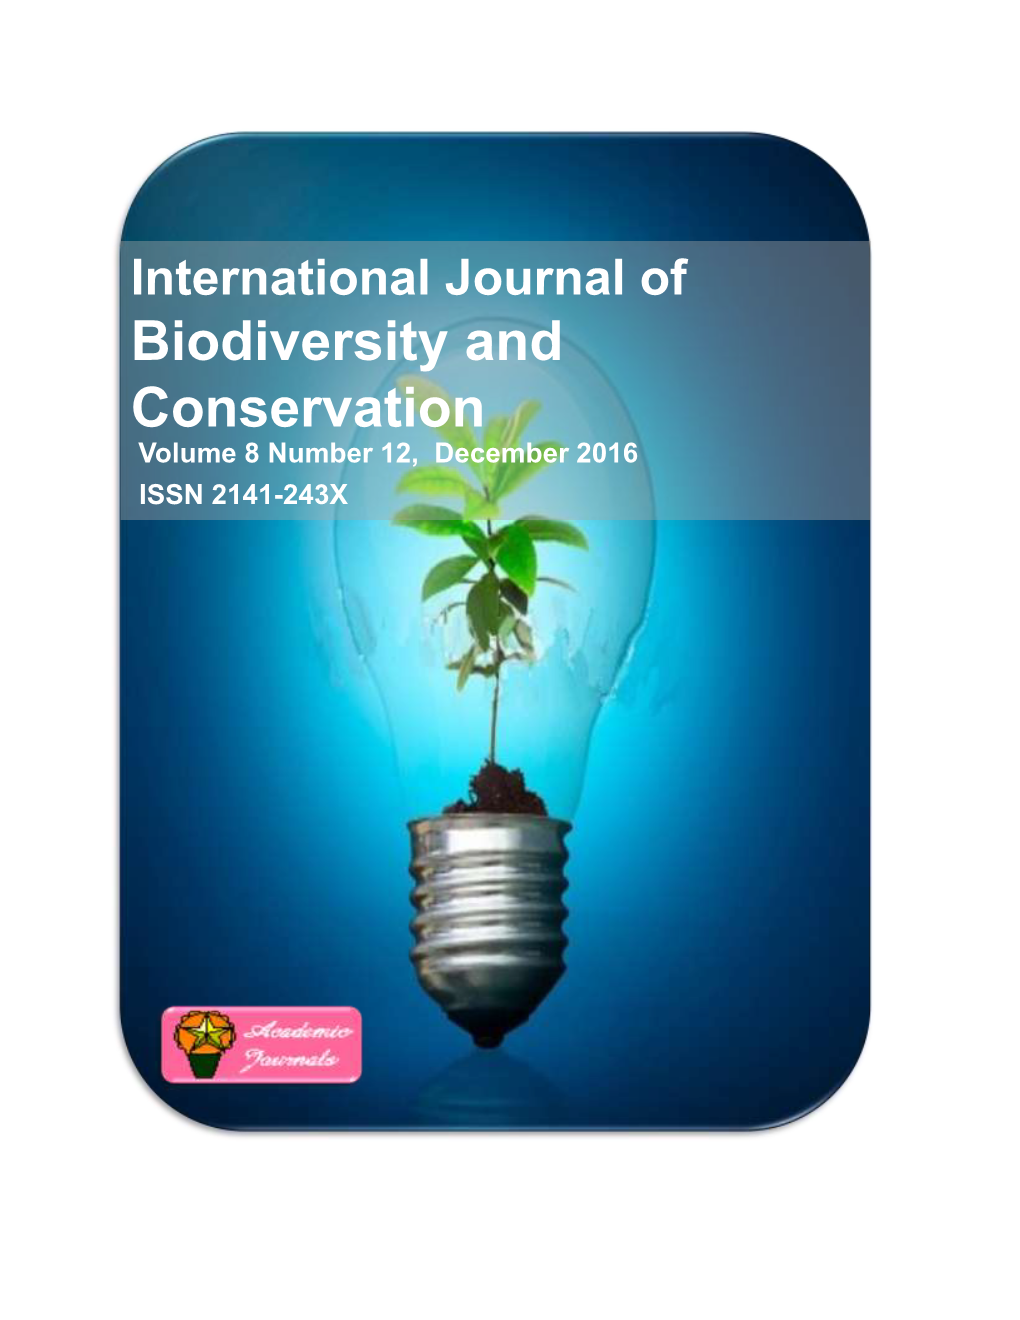 Biodiversity and Conservation Volume 8 Number 12, December 2016 ISSN 2141-243X